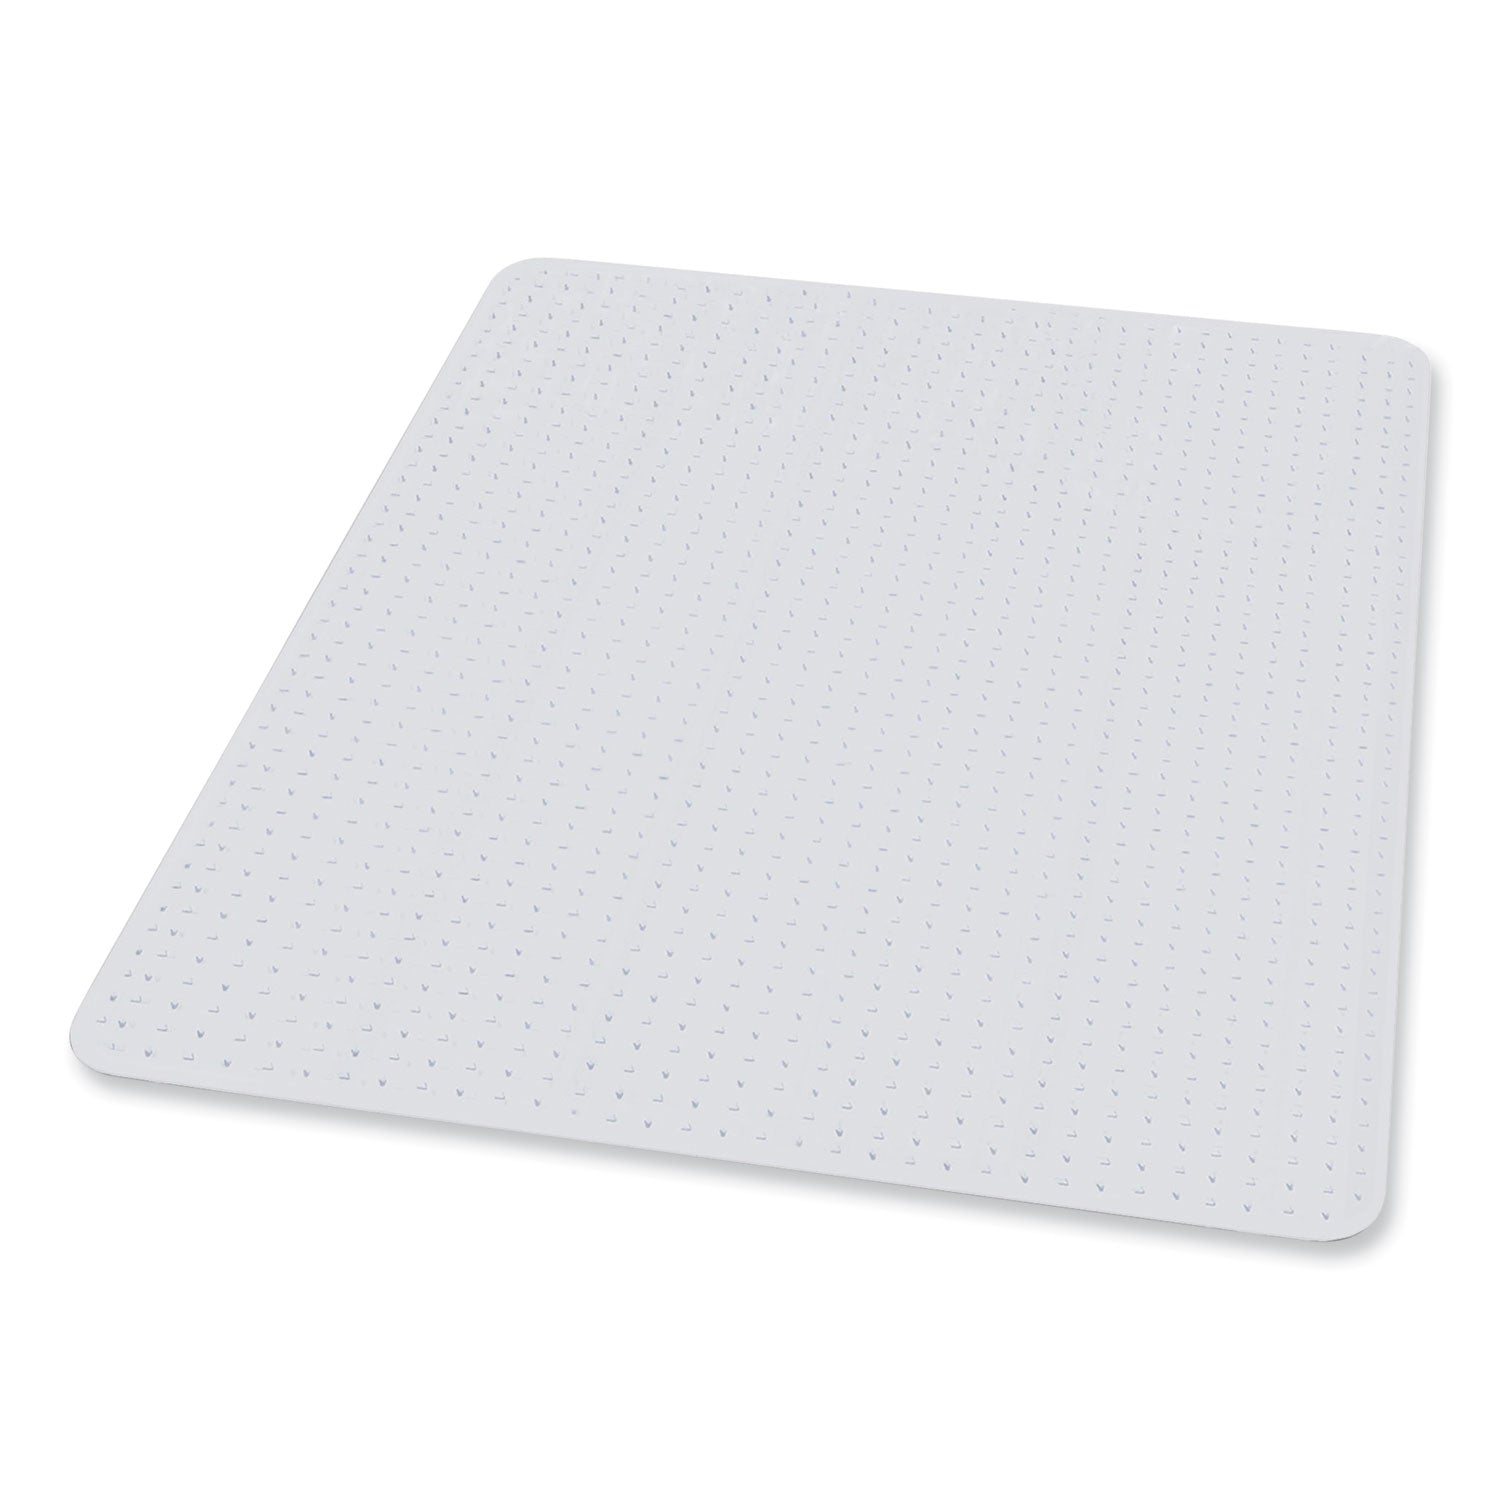 everlife-chair-mat-for-extra-high-pile-carpet-48-x-72-clear-ships-in-4-6-business-days_esr124481 - 1